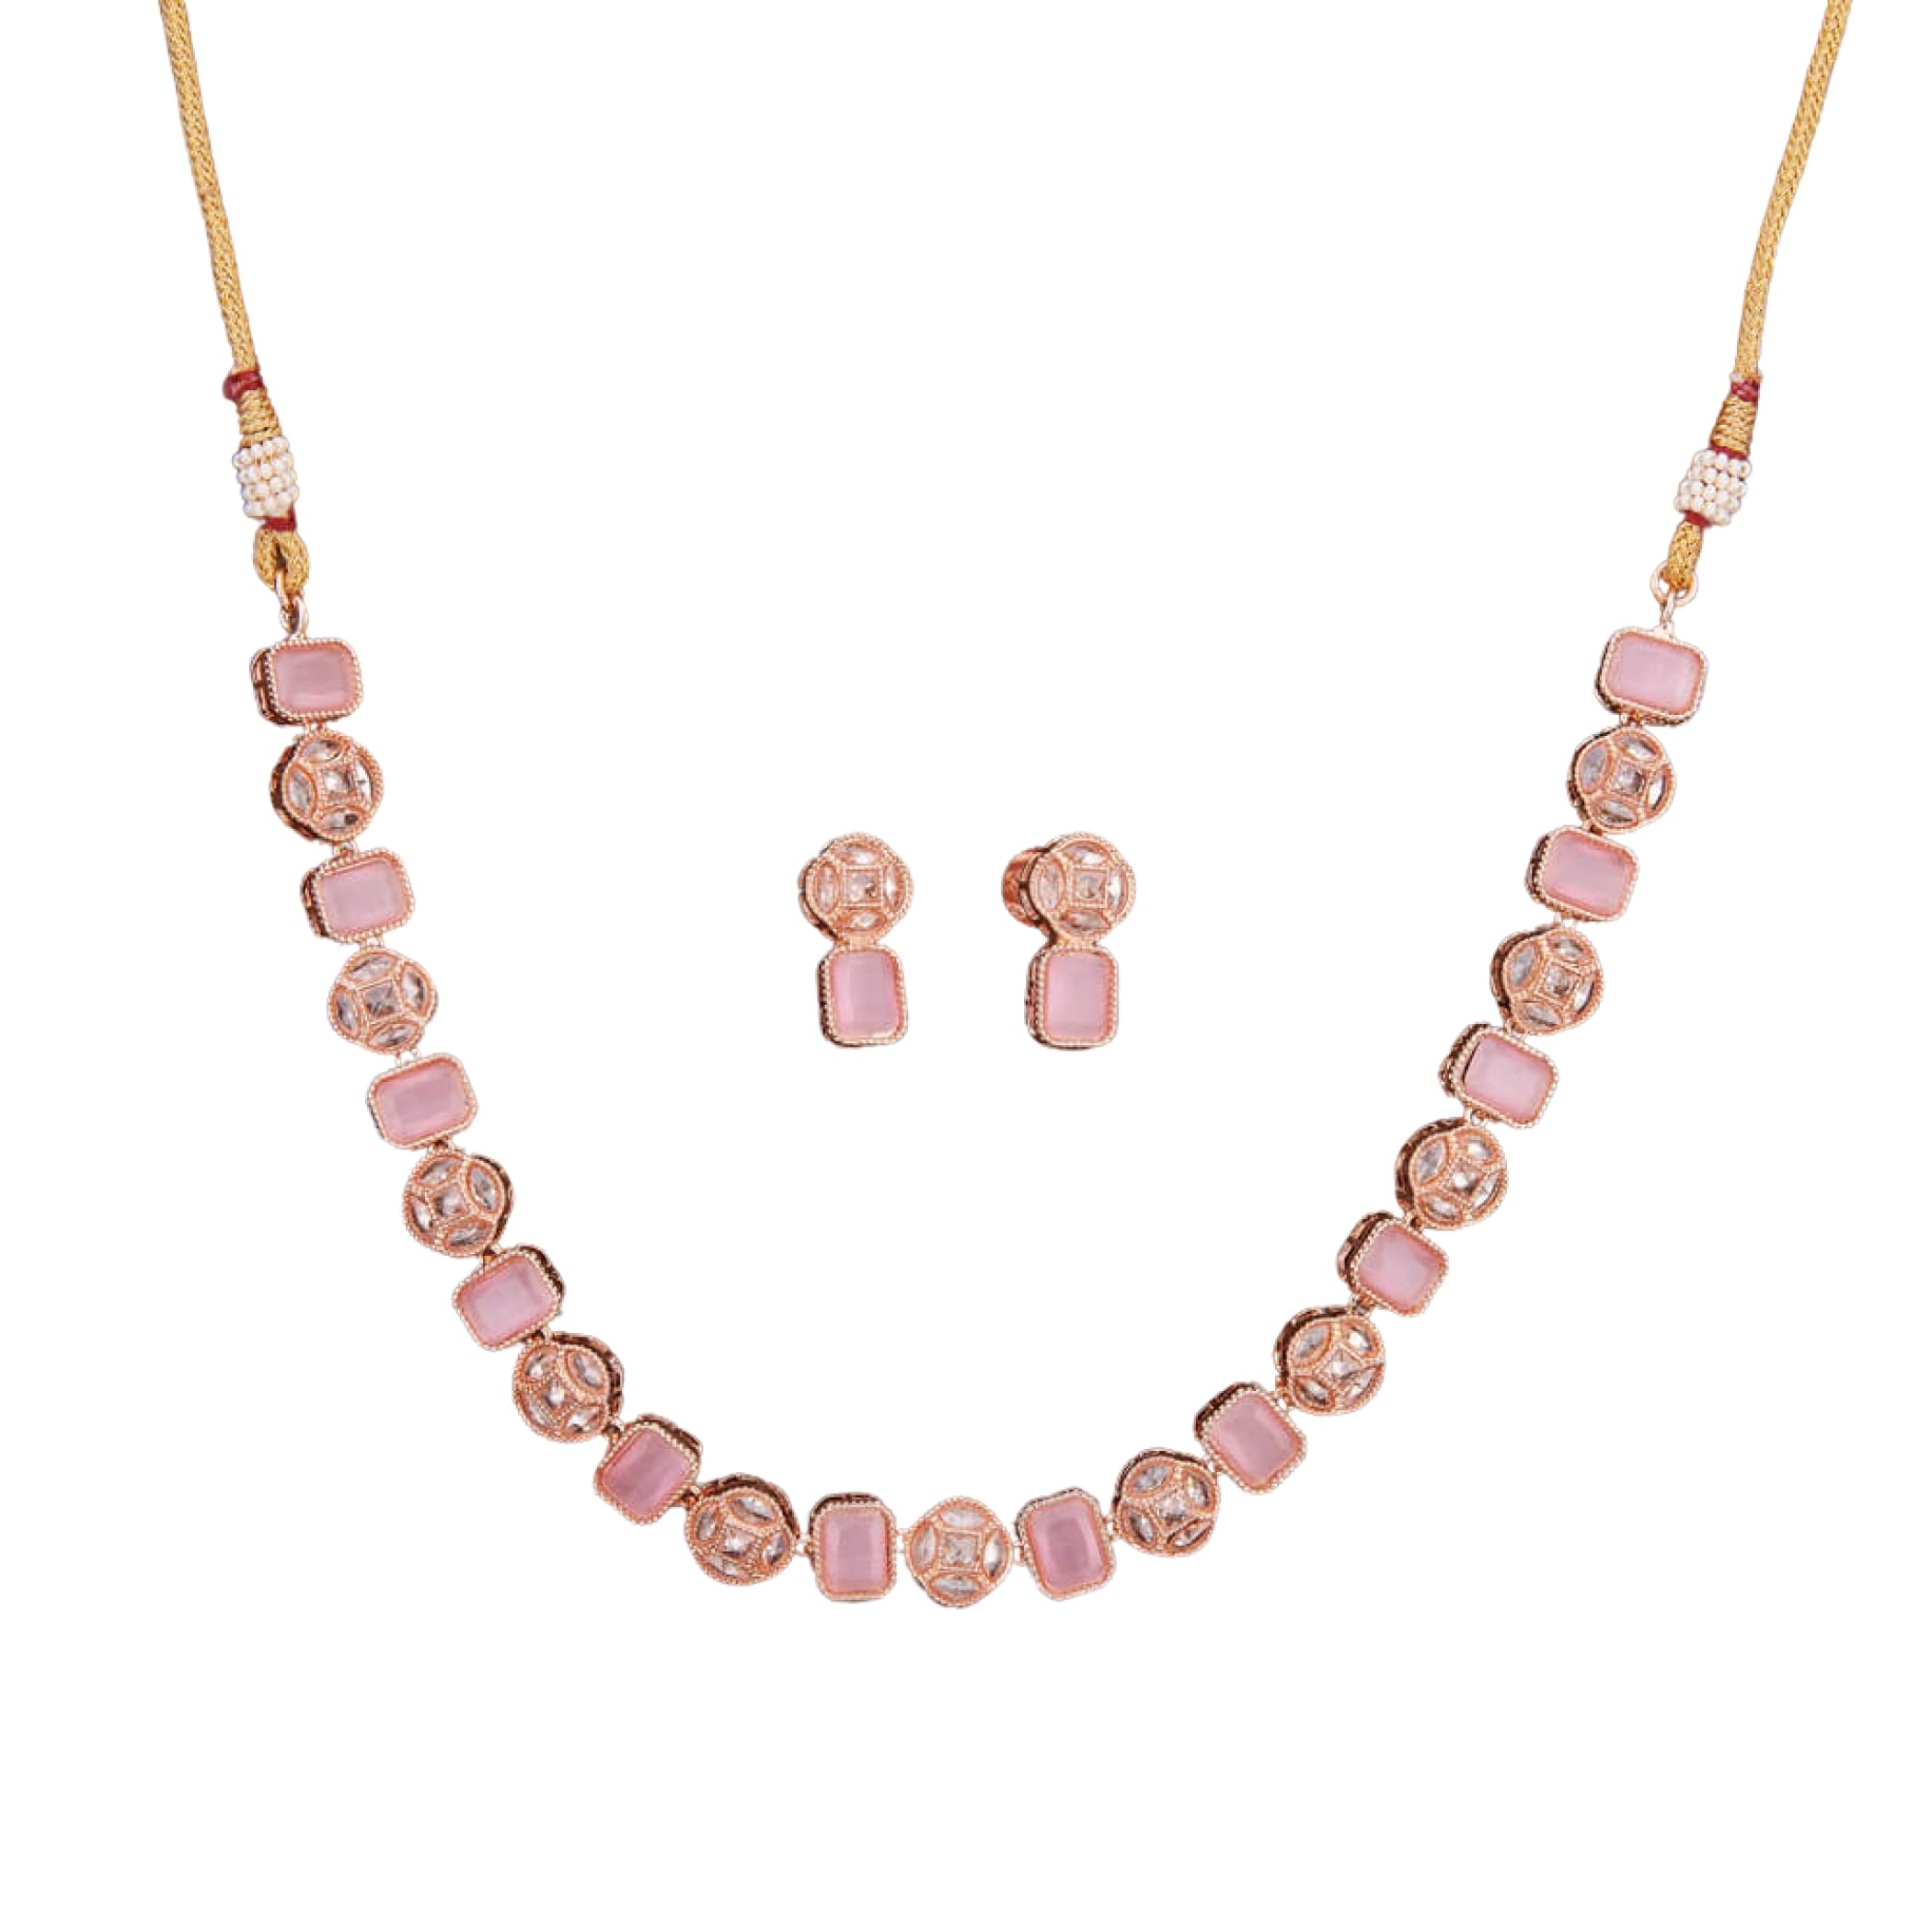 Classic necklace with rose gold plating pendant set jewelry